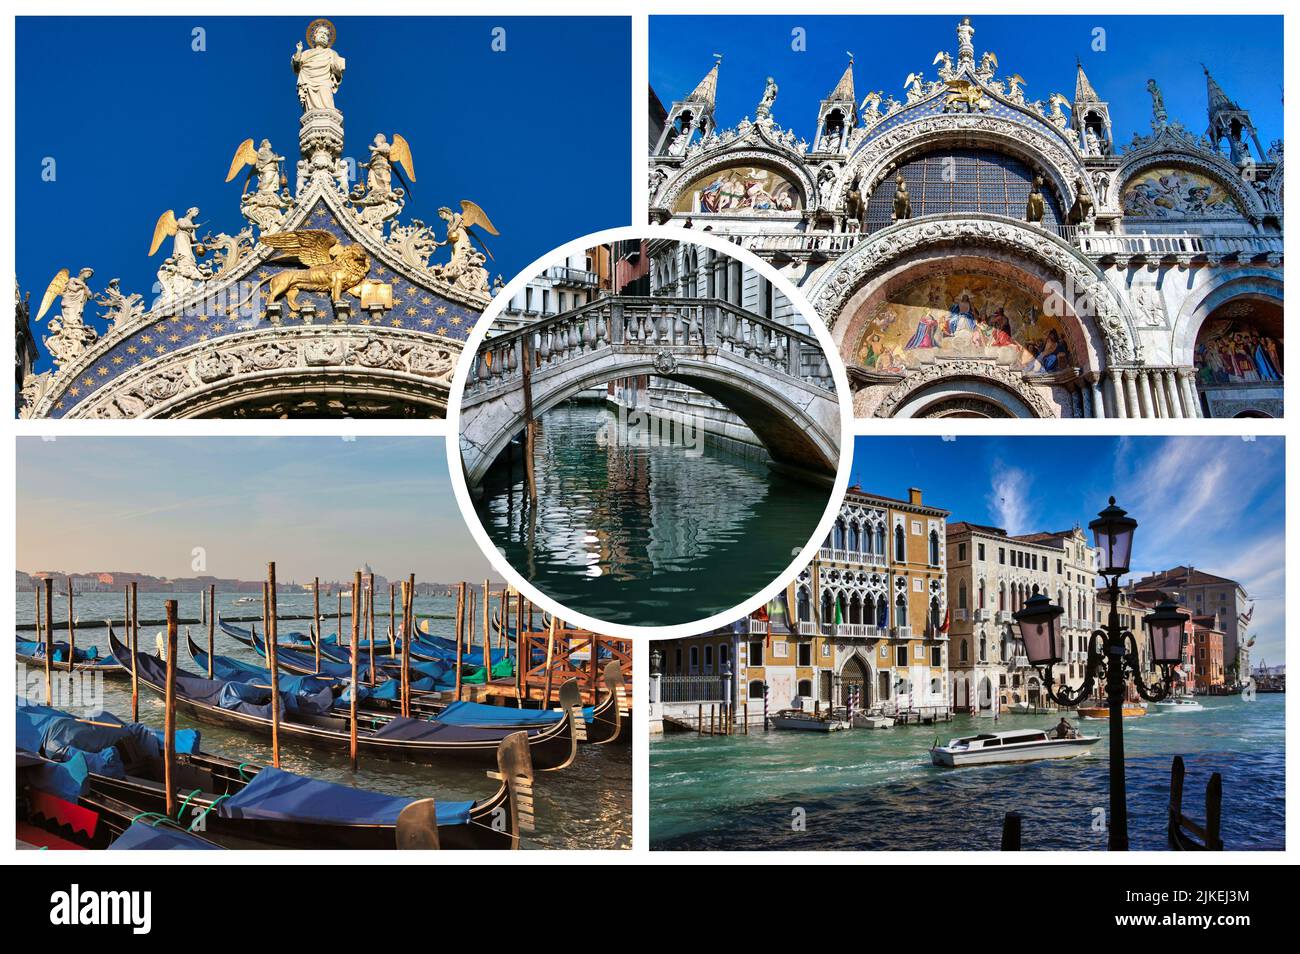 The Famous Venice, the capital of the Veneto region, (Italy) lies on more than 100 small islands within a lagoon in the Adriatic Sea. Stock Photo